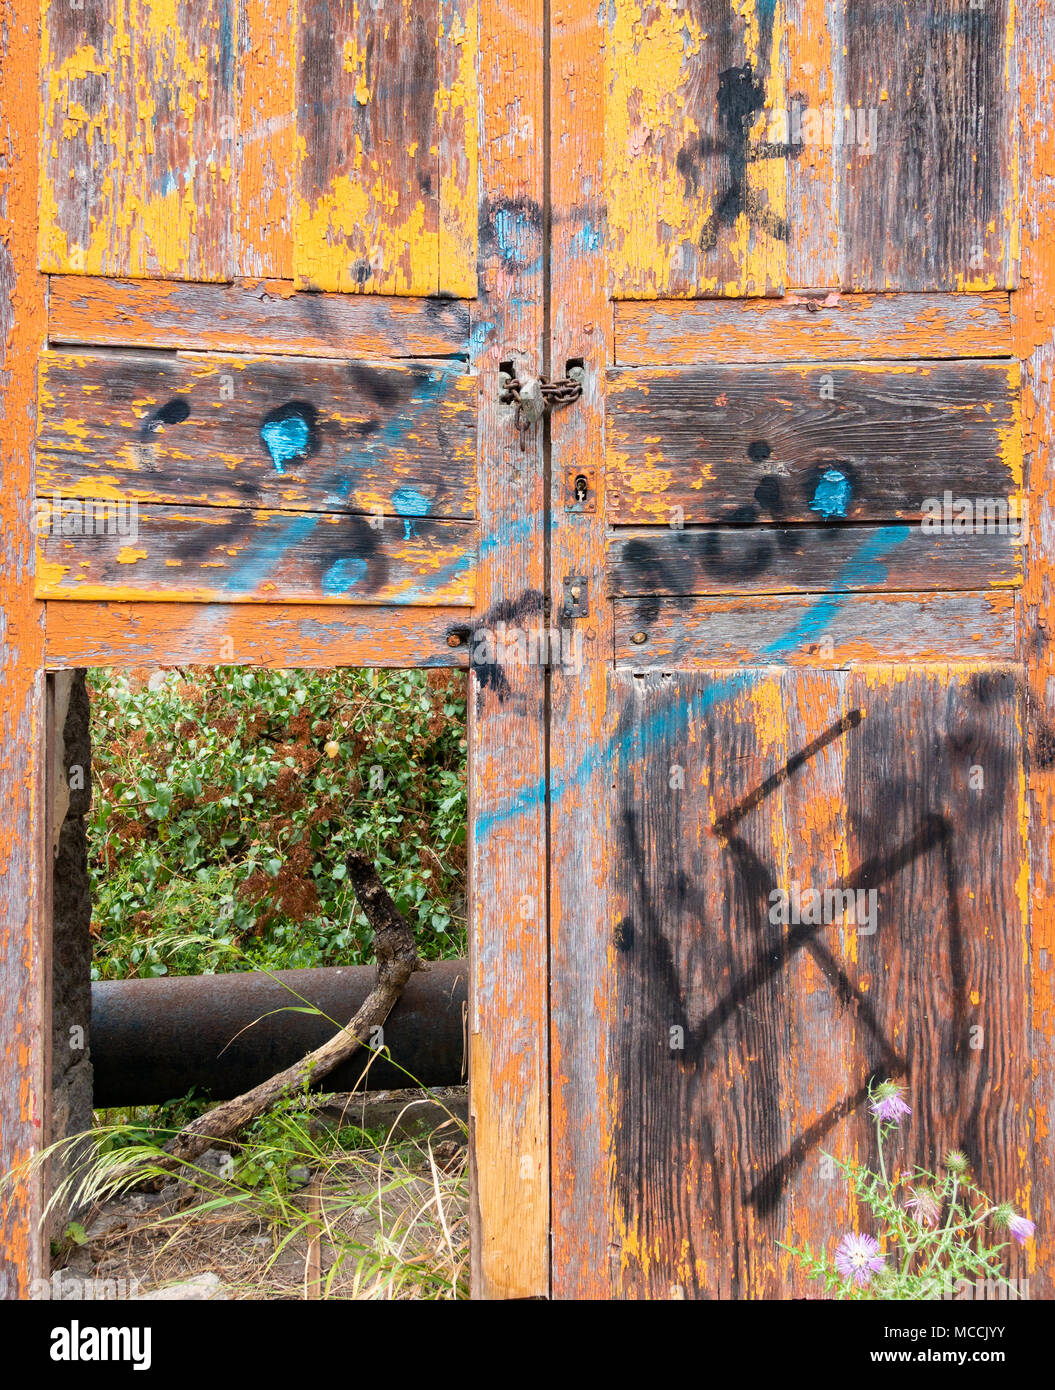 Flaking/peeling paint on old, weathered wooden door with swastika painted on door. Stock Photo